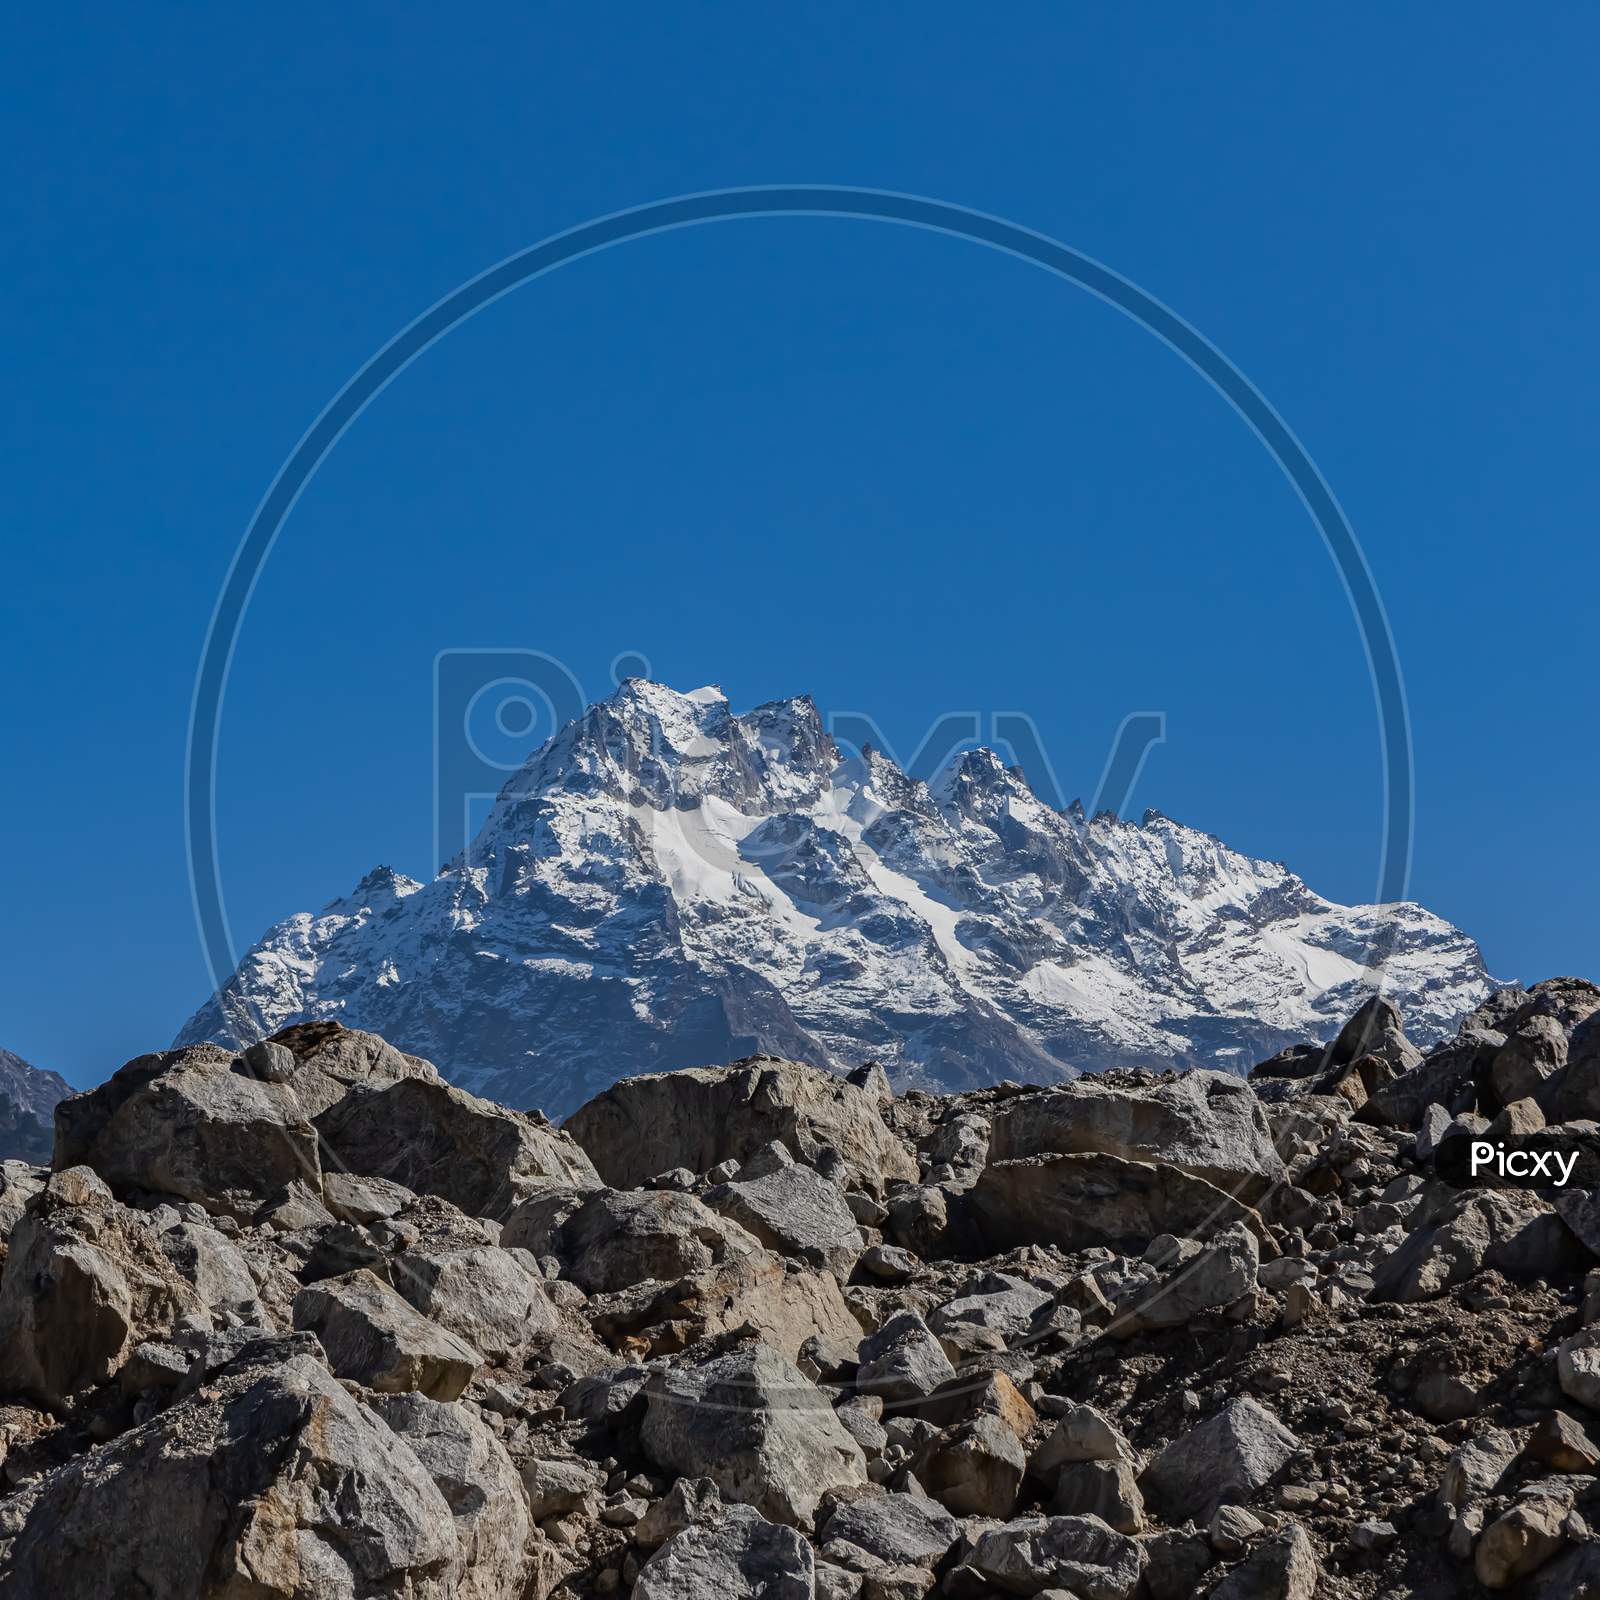 A postcard image of a majestic peak with blue sky on the horizon